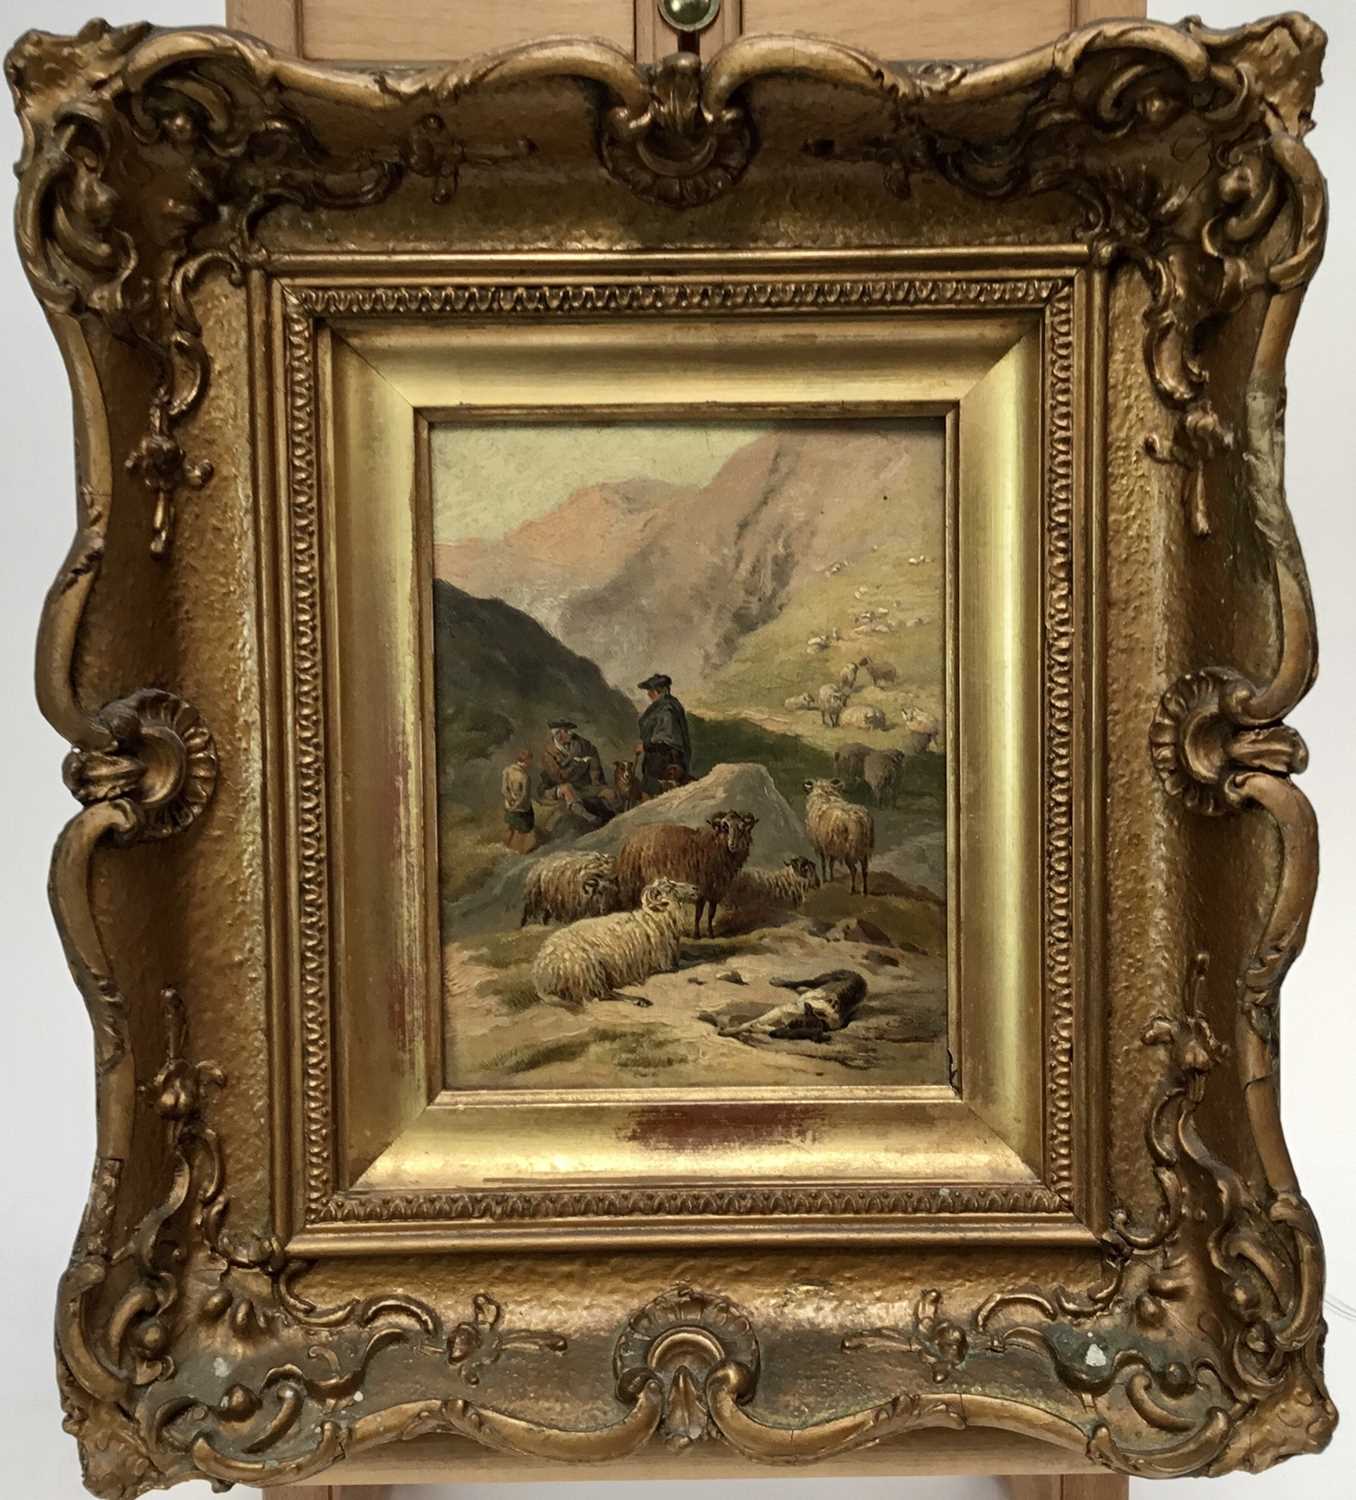 Lot 161 - T. C. Bale, late 19th century, oil on panel - Sabbath in the North, signed and dated 1880, inscribed verso, in gilt frame